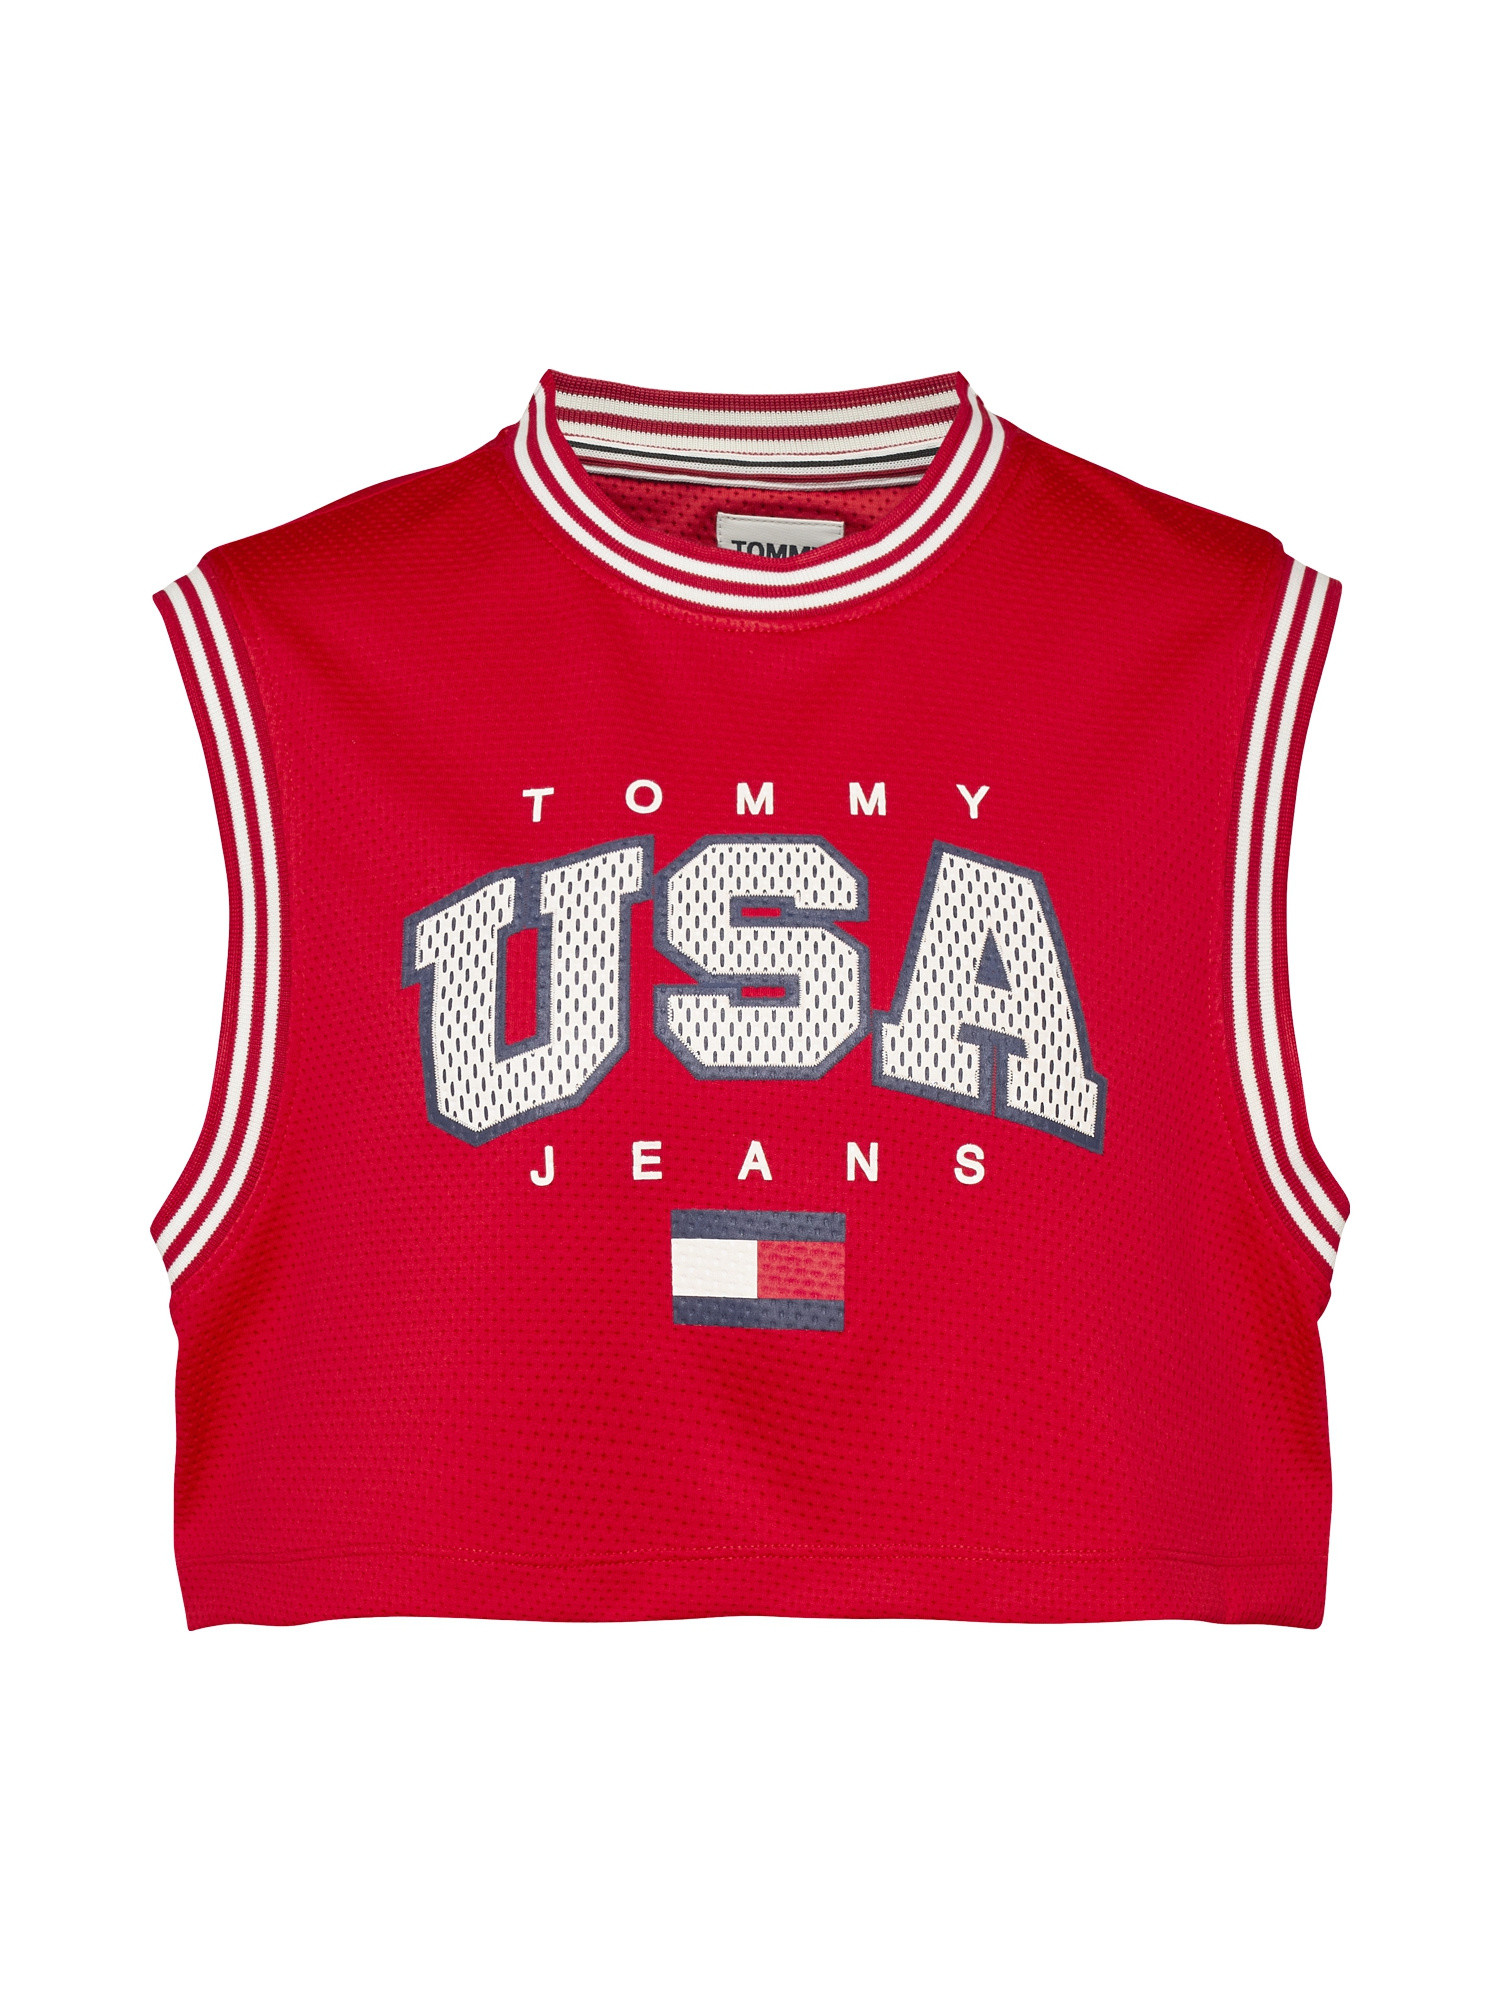 Tommy Jeans - Cropped tank top, Red, large image number 0